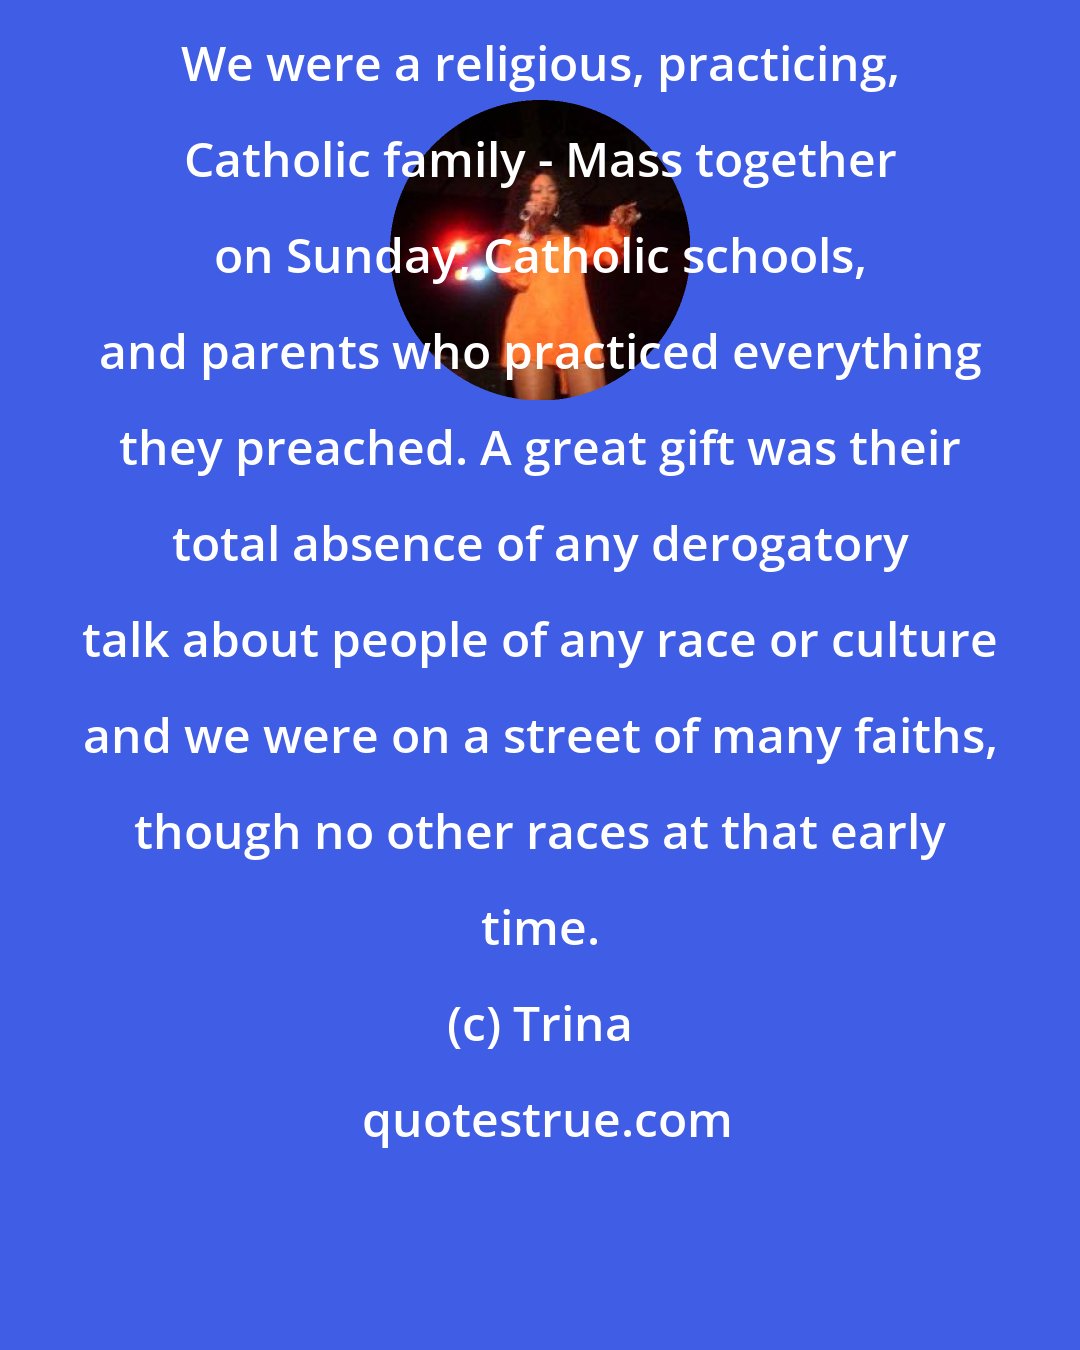 Trina: We were a religious, practicing, Catholic family - Mass together on Sunday, Catholic schools, and parents who practiced everything they preached. A great gift was their total absence of any derogatory talk about people of any race or culture and we were on a street of many faiths, though no other races at that early time.